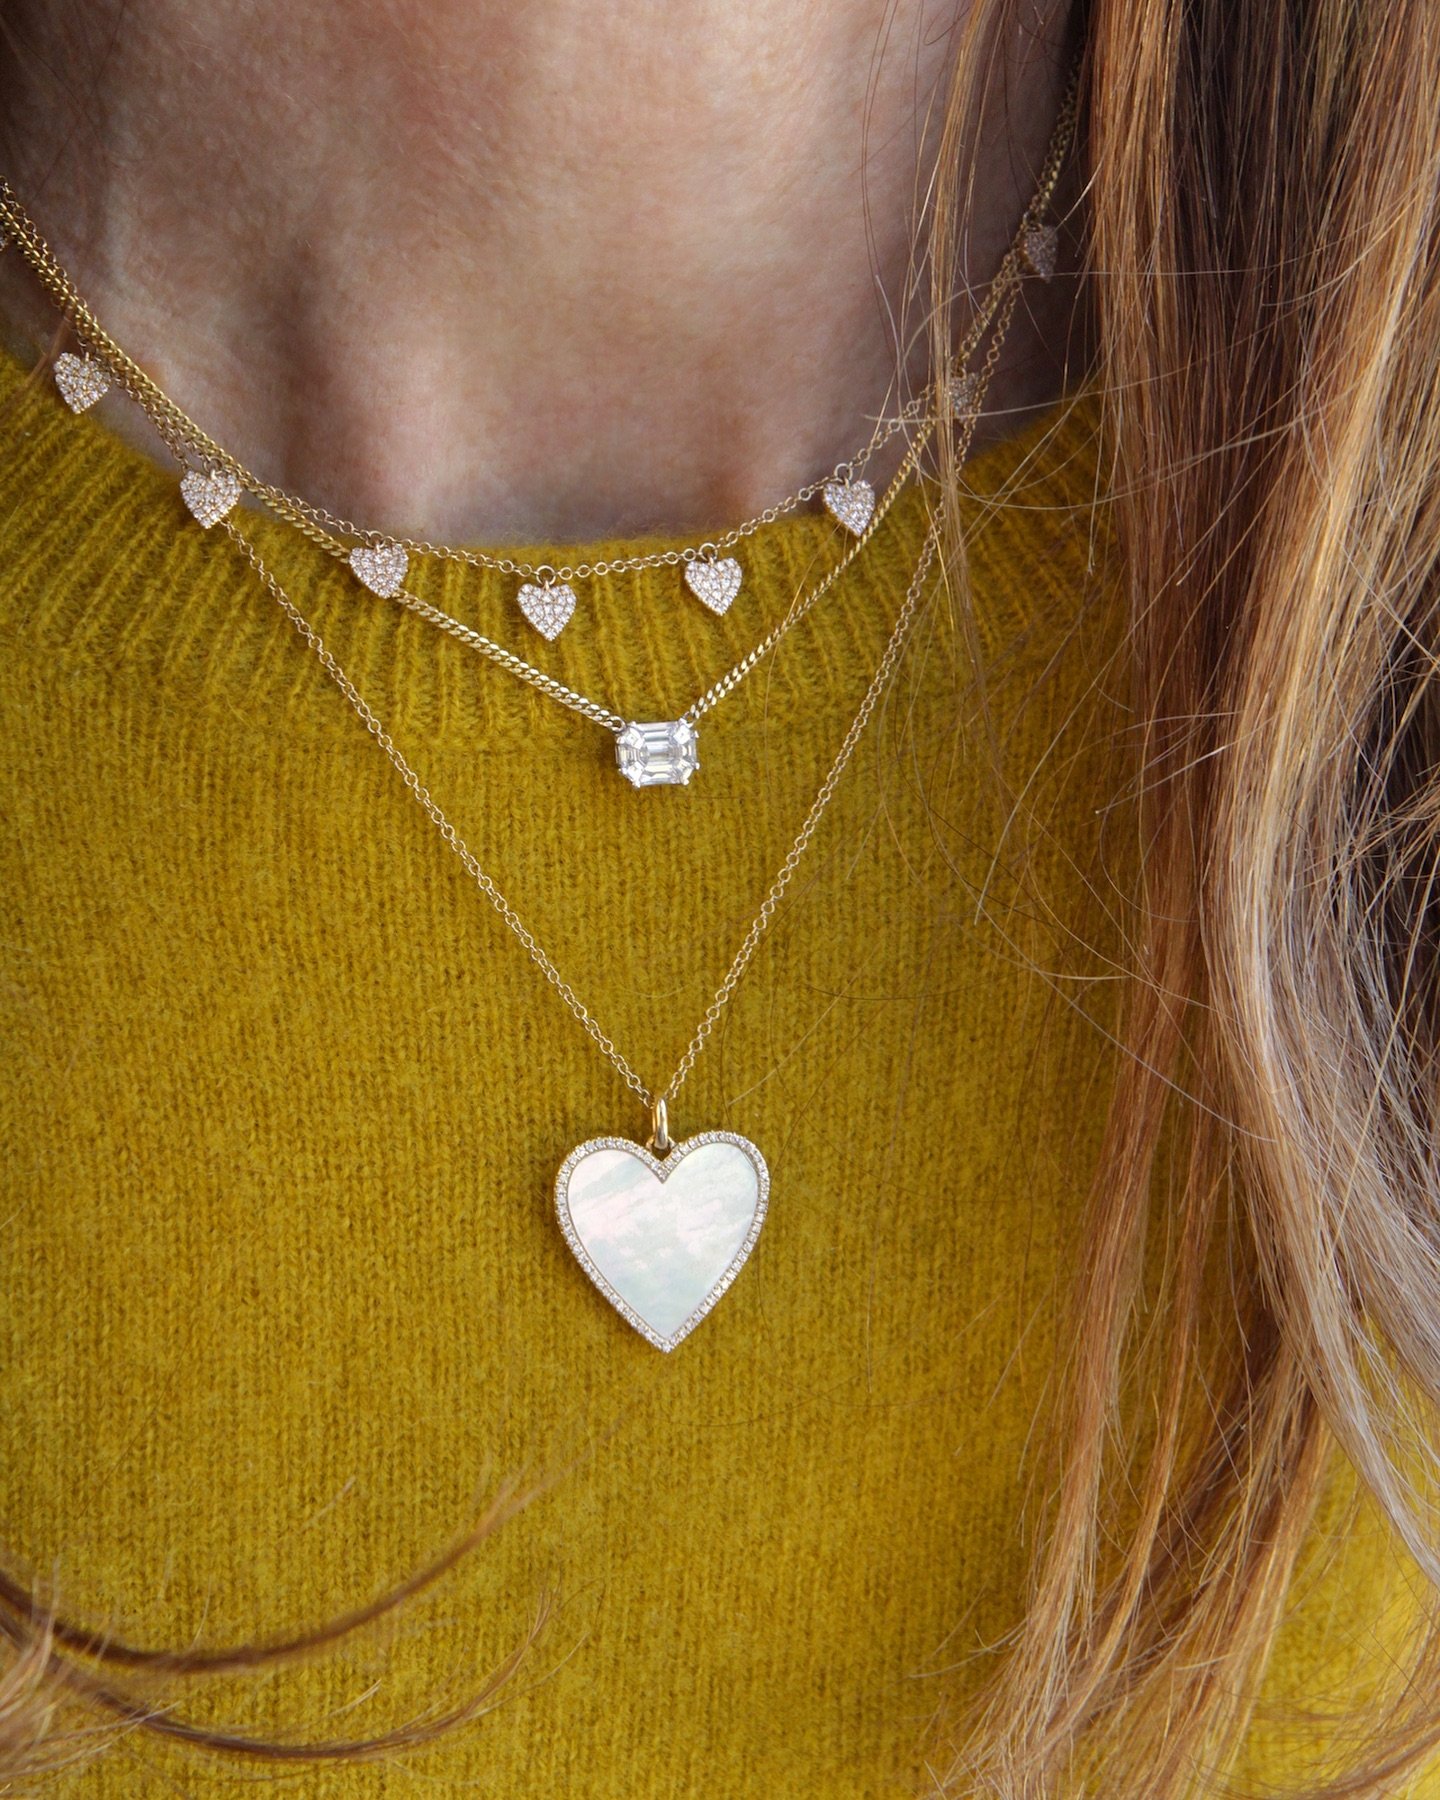 I ❤️ hearts! 
Mother&rsquo;s Day is right around the corner! Take 20% off orders until May 12th.
💕 #heart #heartnecklace #diamondheart #love #romance #finejewelry #mothersday #mom mothersdaygift